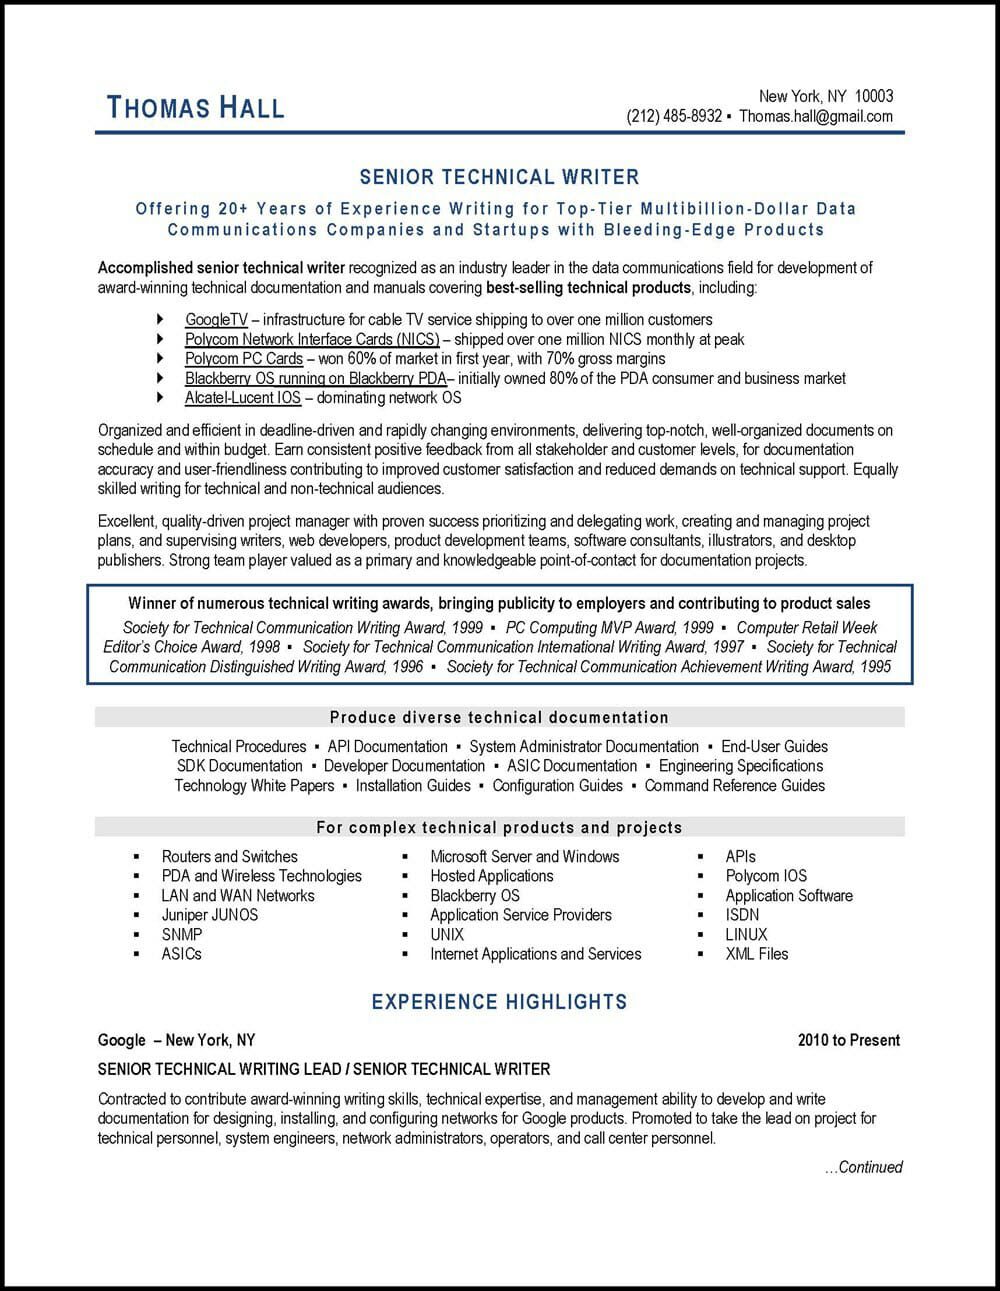 Expert resume writing and cover letter